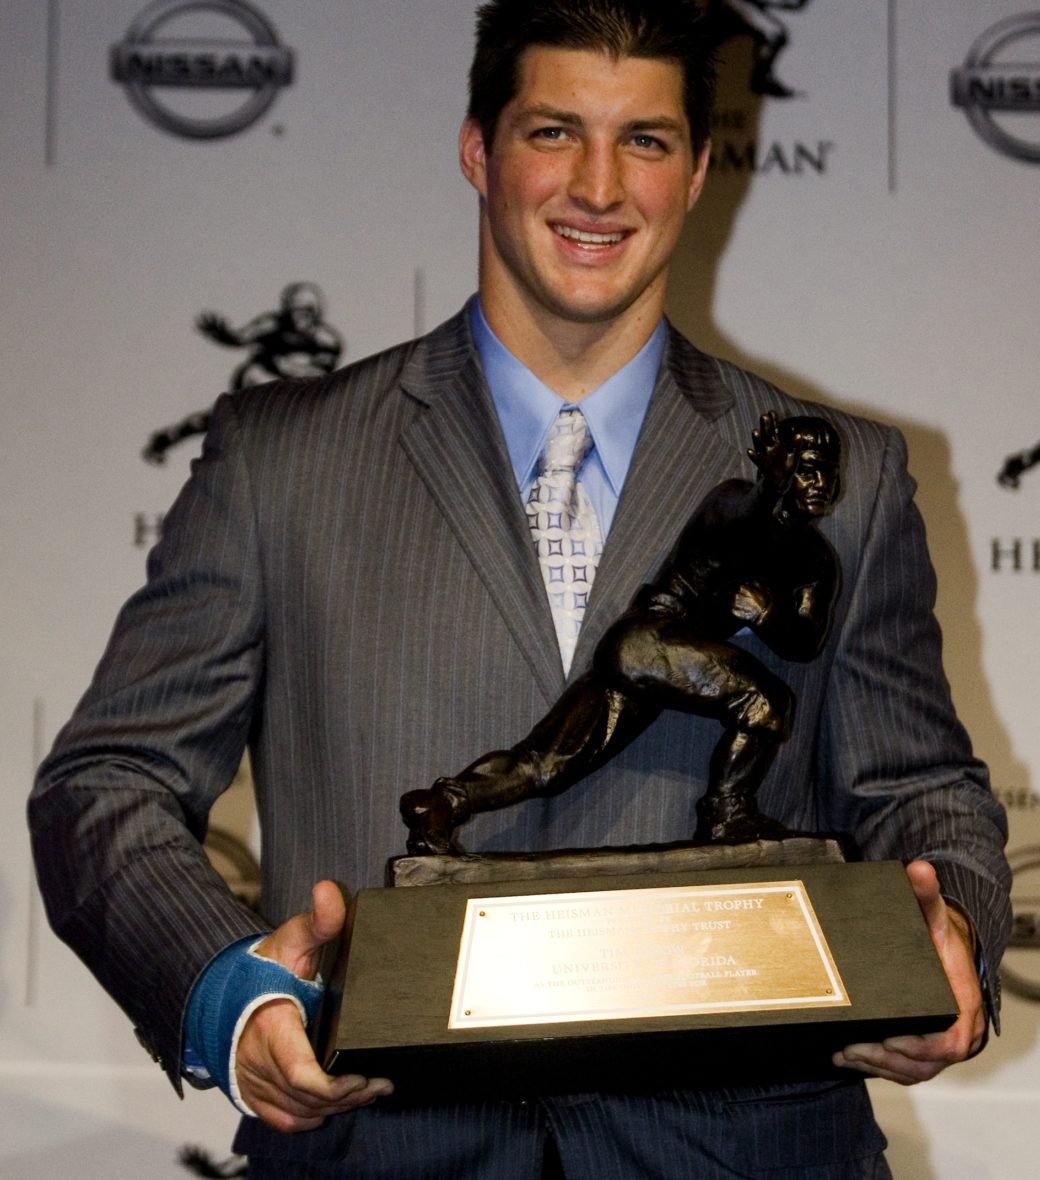 Tim Tebow (2007): Throwing for 3,132 yards and 29 touchdowns, Tim Tebow won the Heisman before leading the Florida Gators to a national championship title. (Courtesy of University of Florida Athletics)